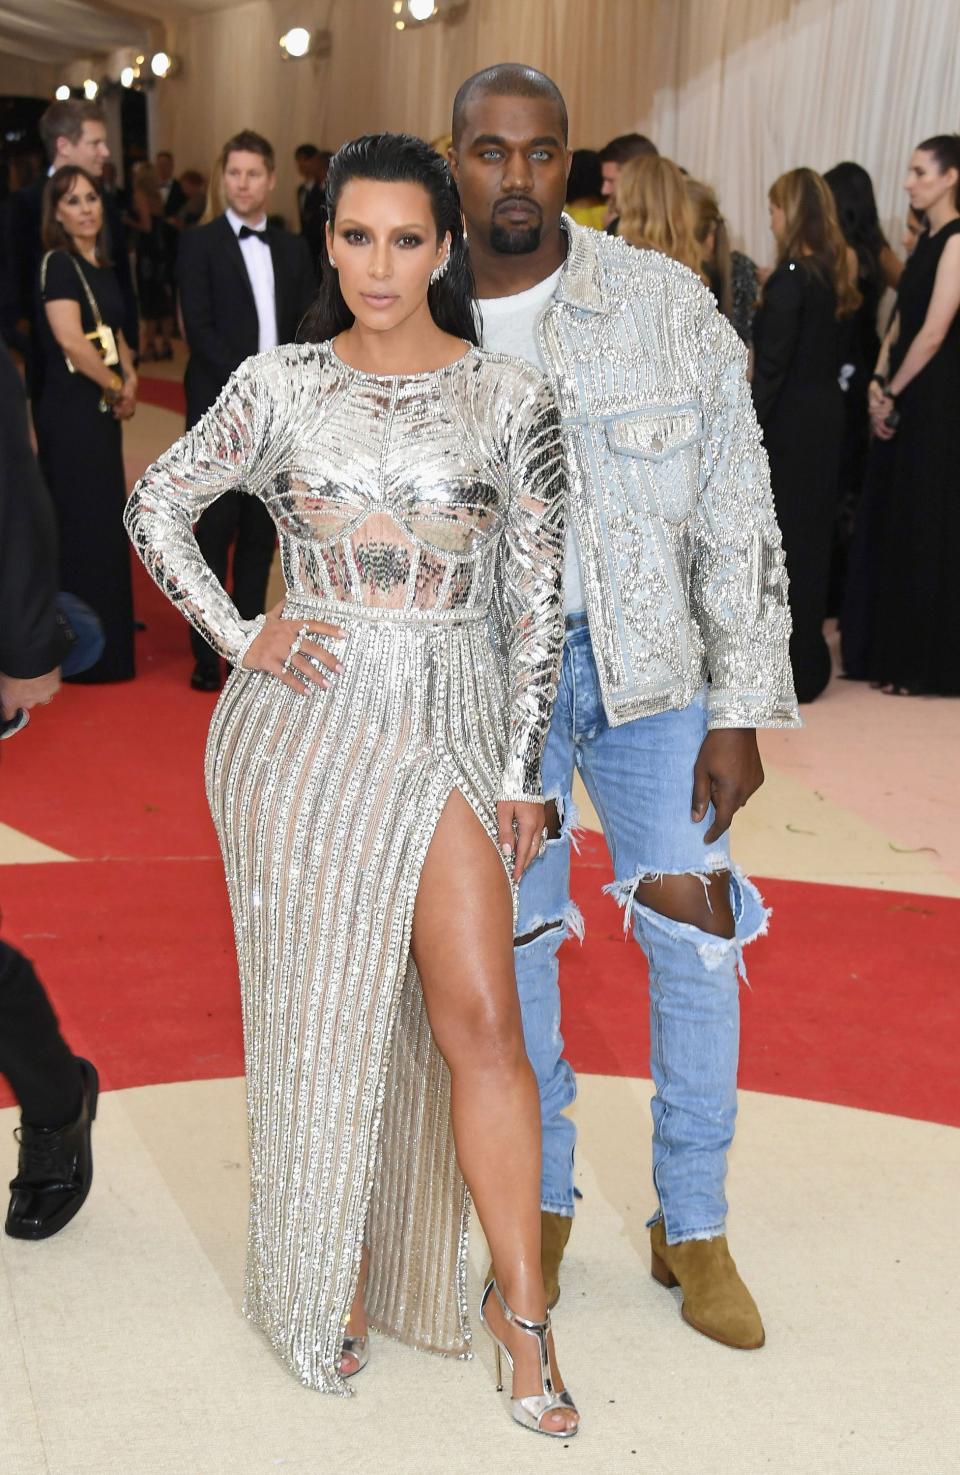 <h1 class="title">Kim Kardashian West in a Balmain dress and Lorraine Schwartz jewelry and Kanye West in Fear of God</h1><cite class="credit">Photo: Getty Images</cite>